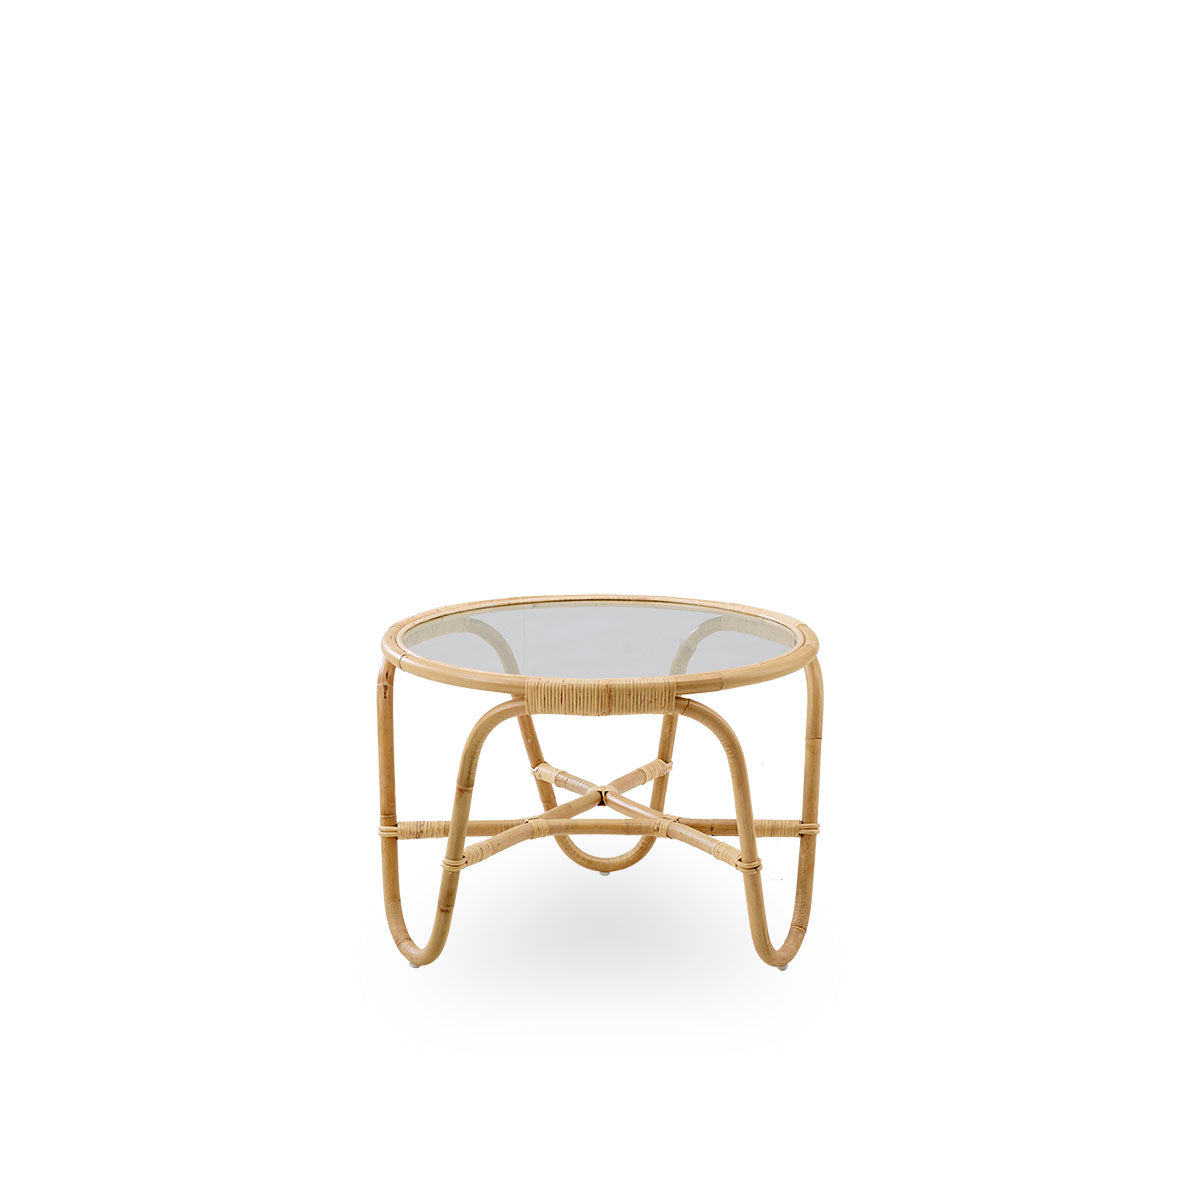 Charlottenborg Coffee Table by Sika